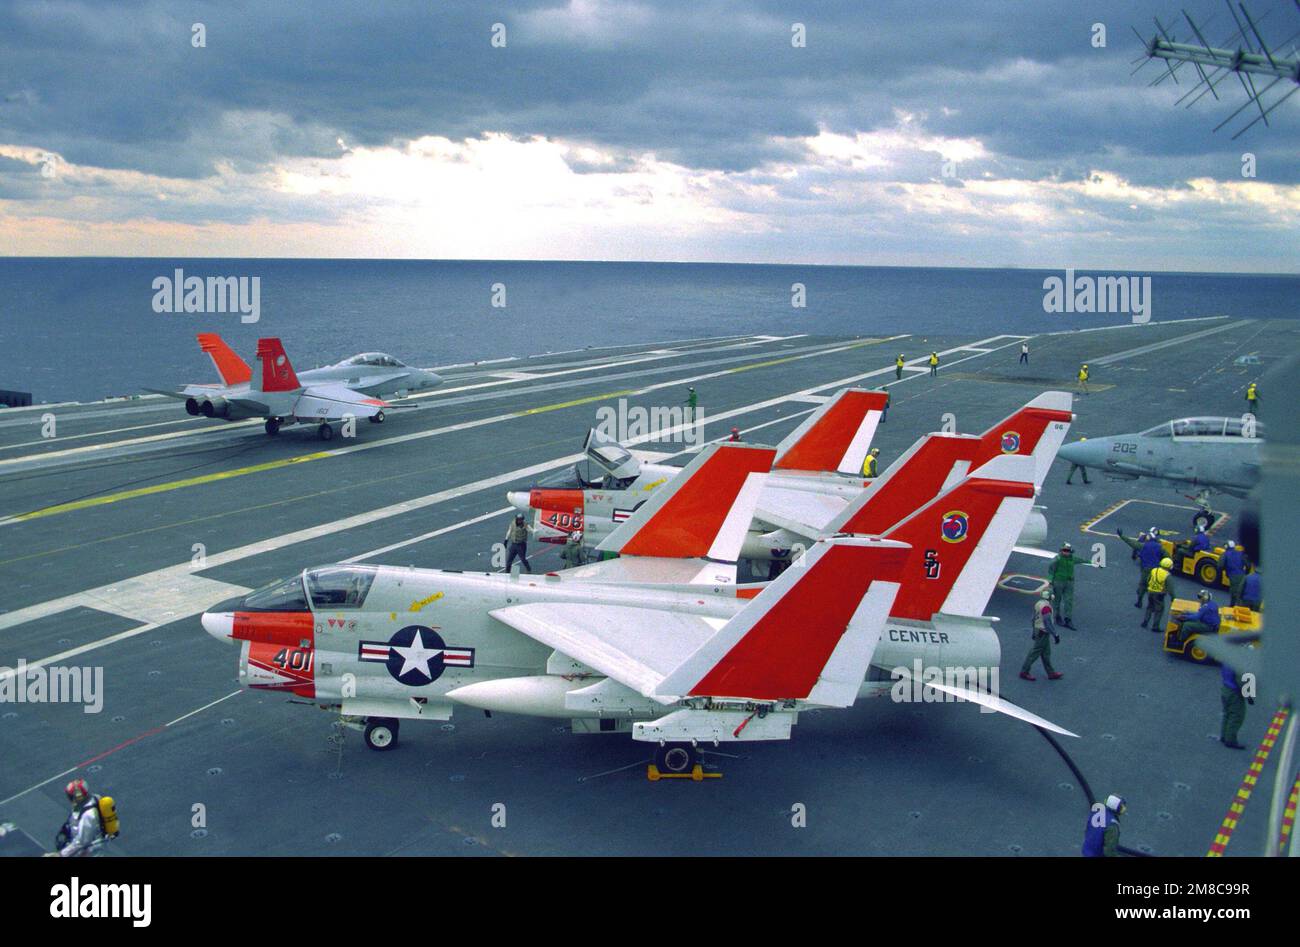 An F-18A Hornet aircraft is positioned on the flight deck of the nuclear-powered aircraft carrier USS ABRAHAM LINCOLN (CVN-72) shortly after landing. The Hornet, along with the two A-7E Corsair II aircraft parked on the sideline, are among several planes from the Patuxent River Flight Test Center aboard the carrier to test the vessel's flight deck capabilities. Country: Atlantic Ocean (AOC) Stock Photo